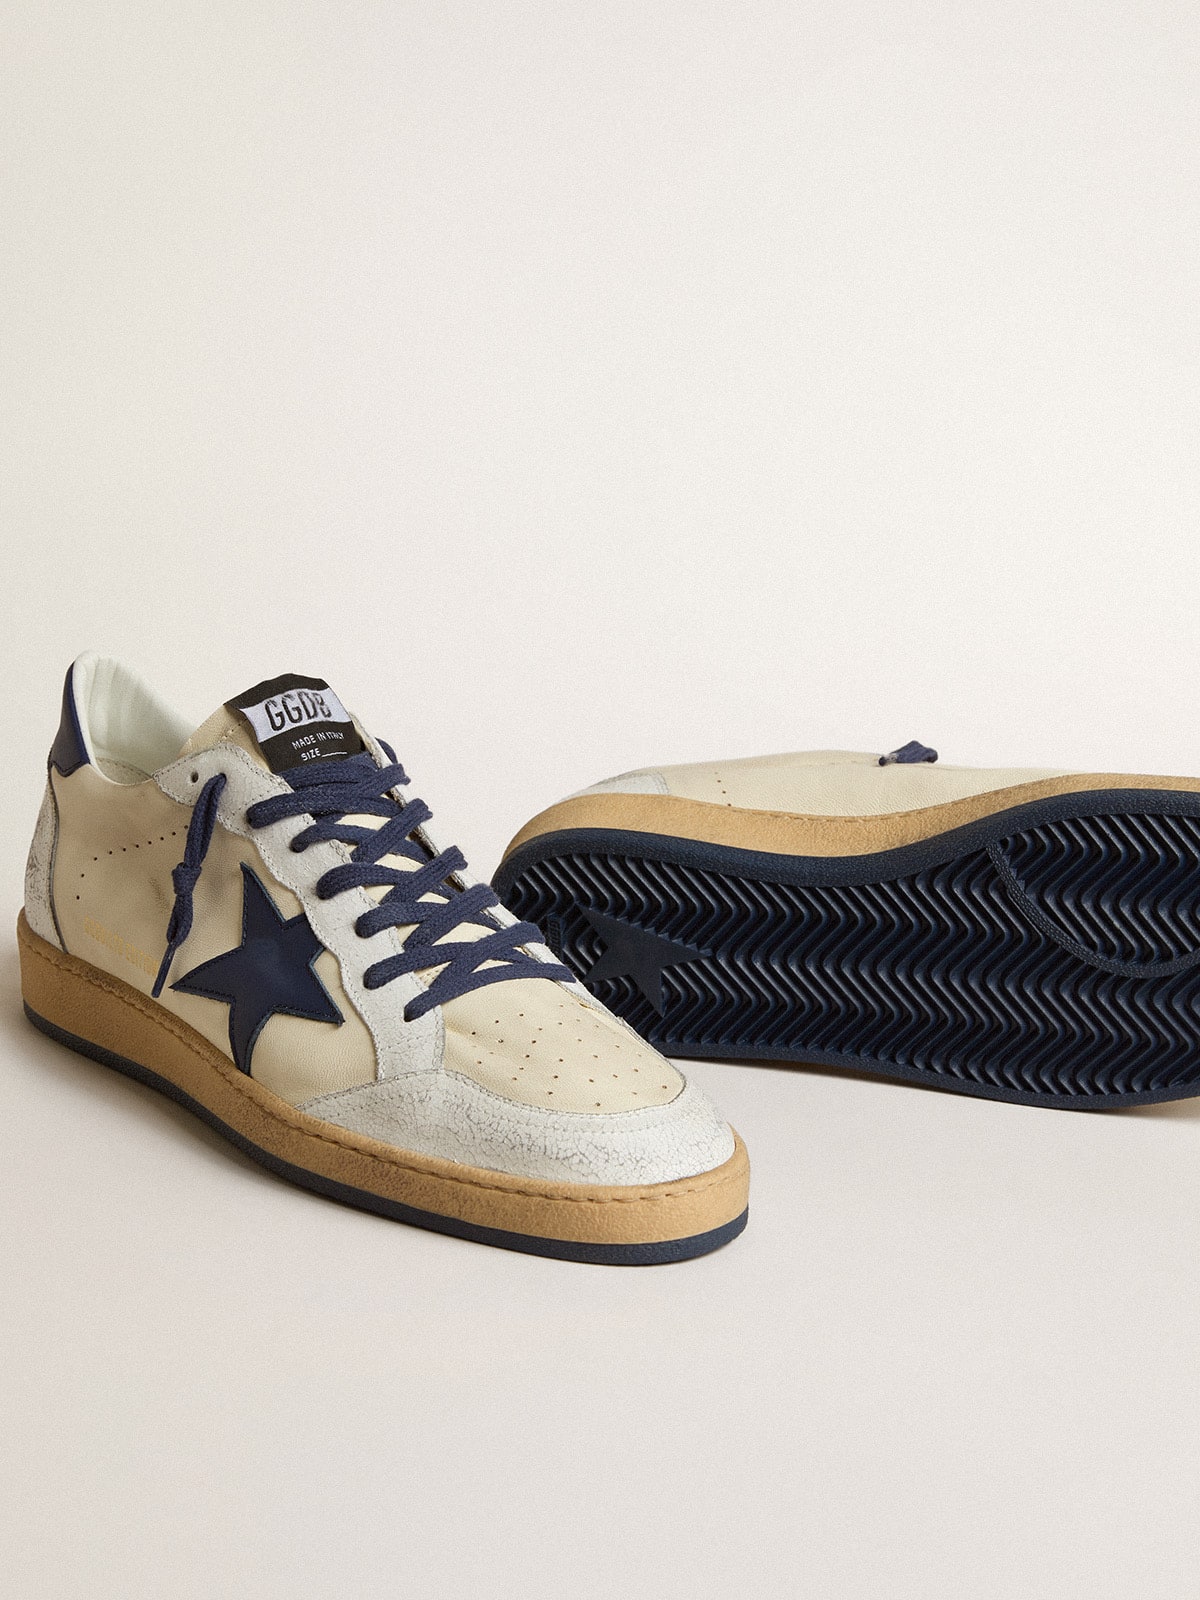 Men's Ball Star LTD in cream nappa with blue leather star and heel tab